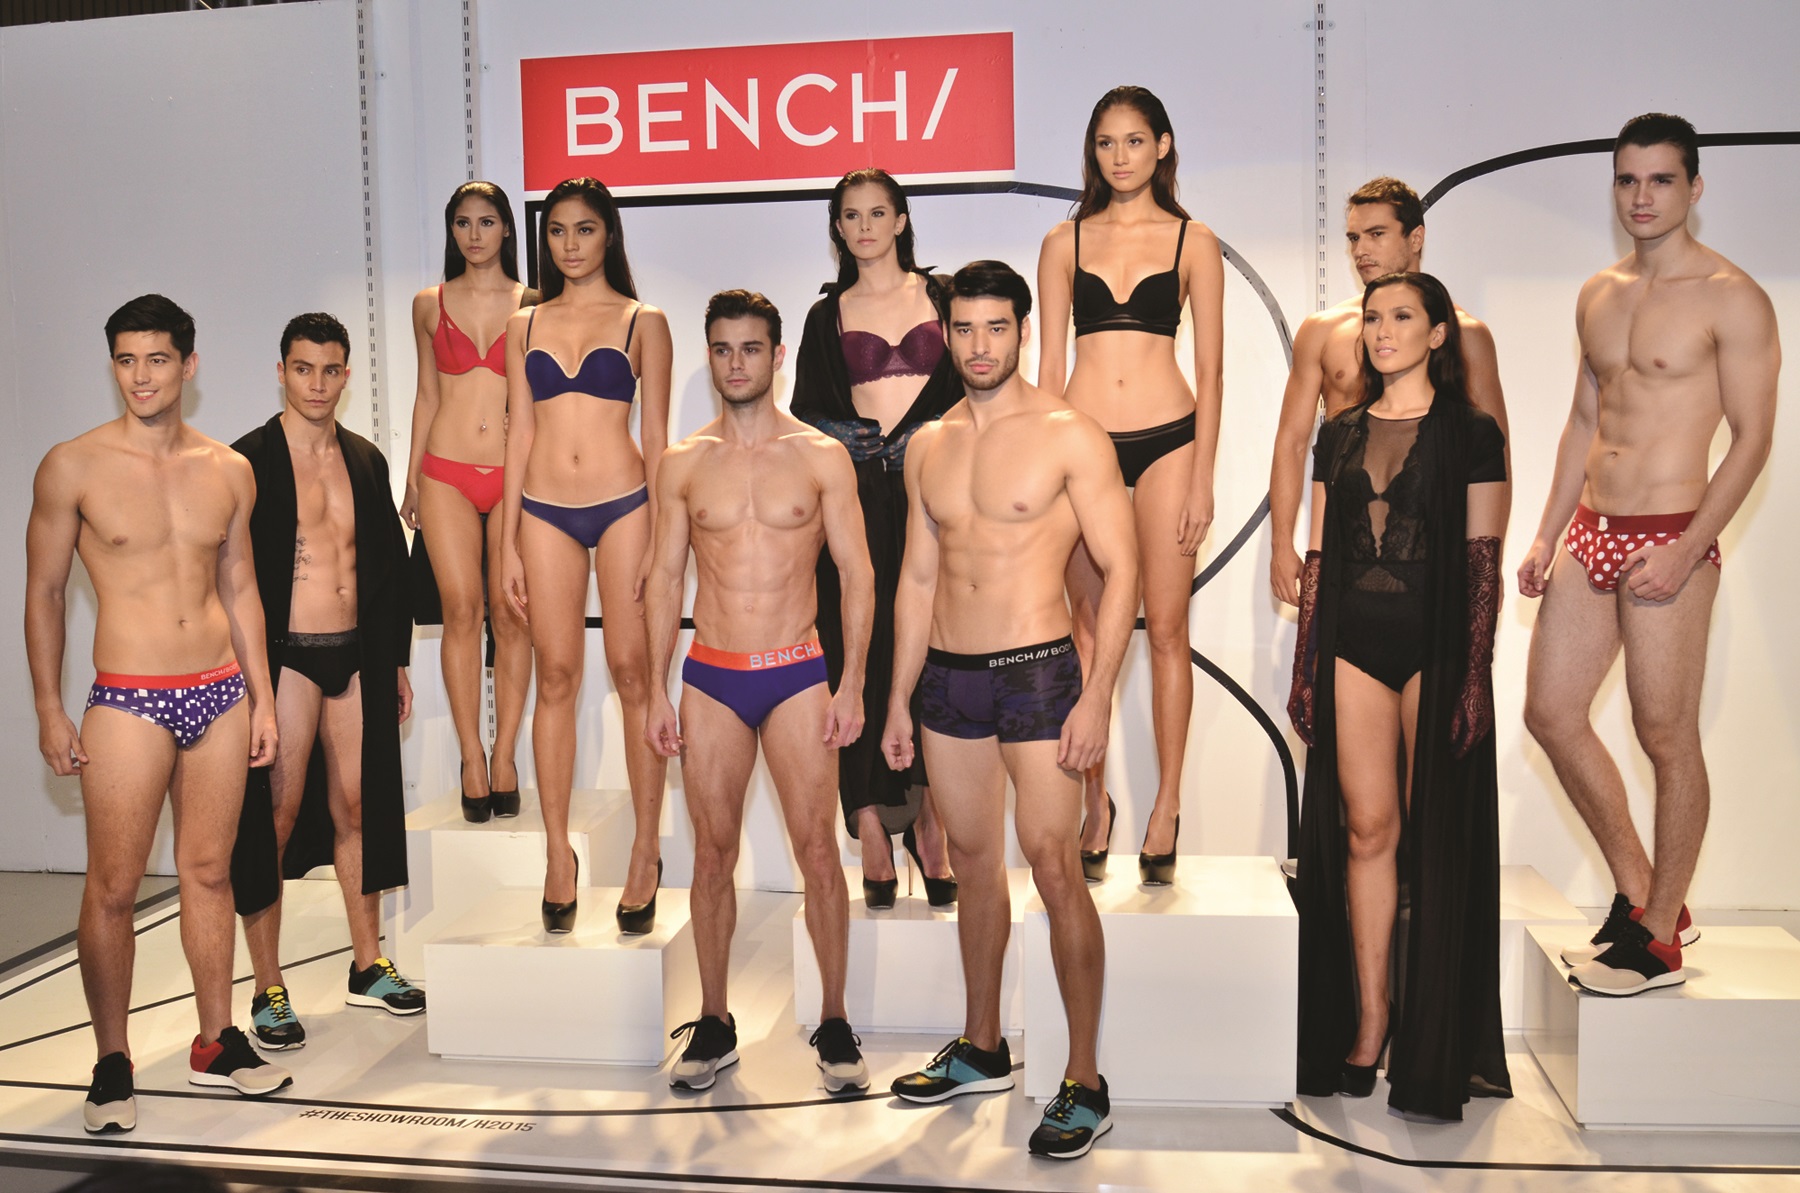 BEAUTIFUL bodies show the latest BenchBody collection featuring new fabrics and waistband treatments.